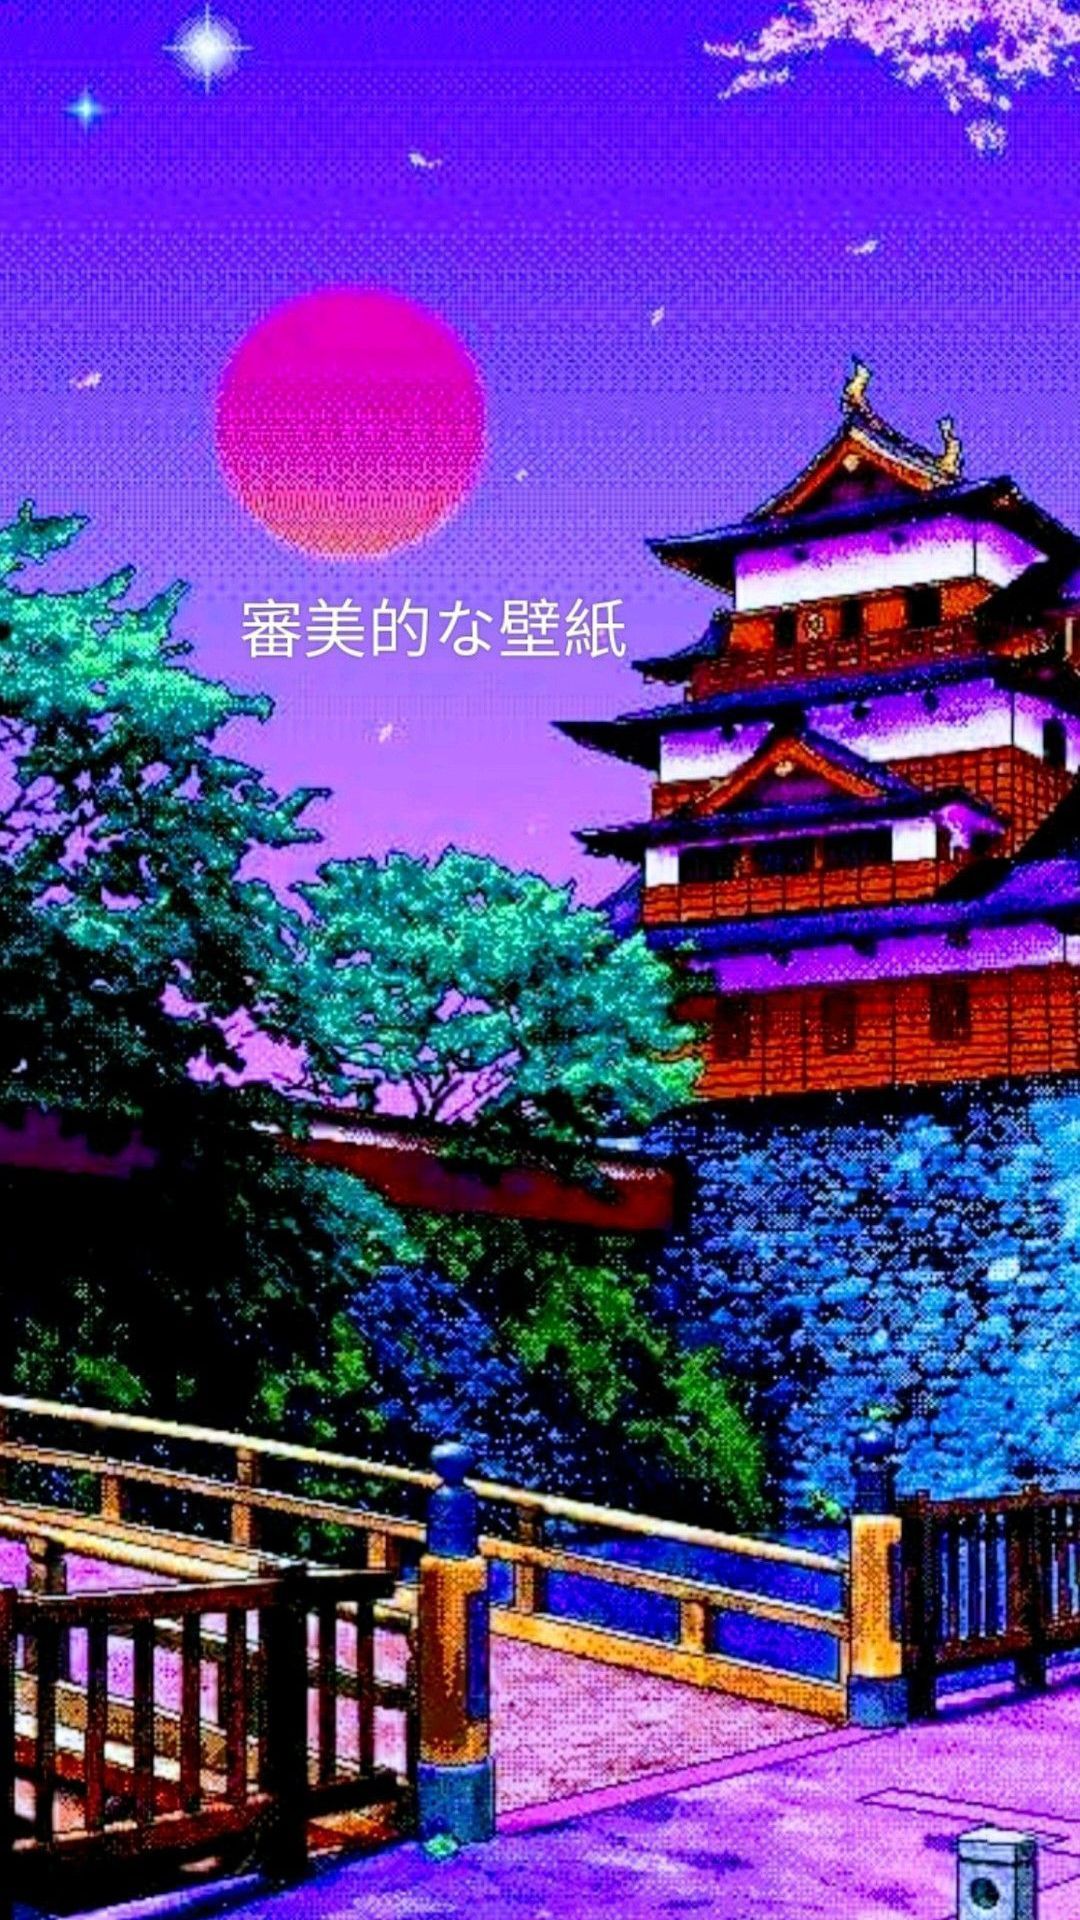 In game menu of the legendary axe 2 on sony playstation - Phone, Chinese, architecture